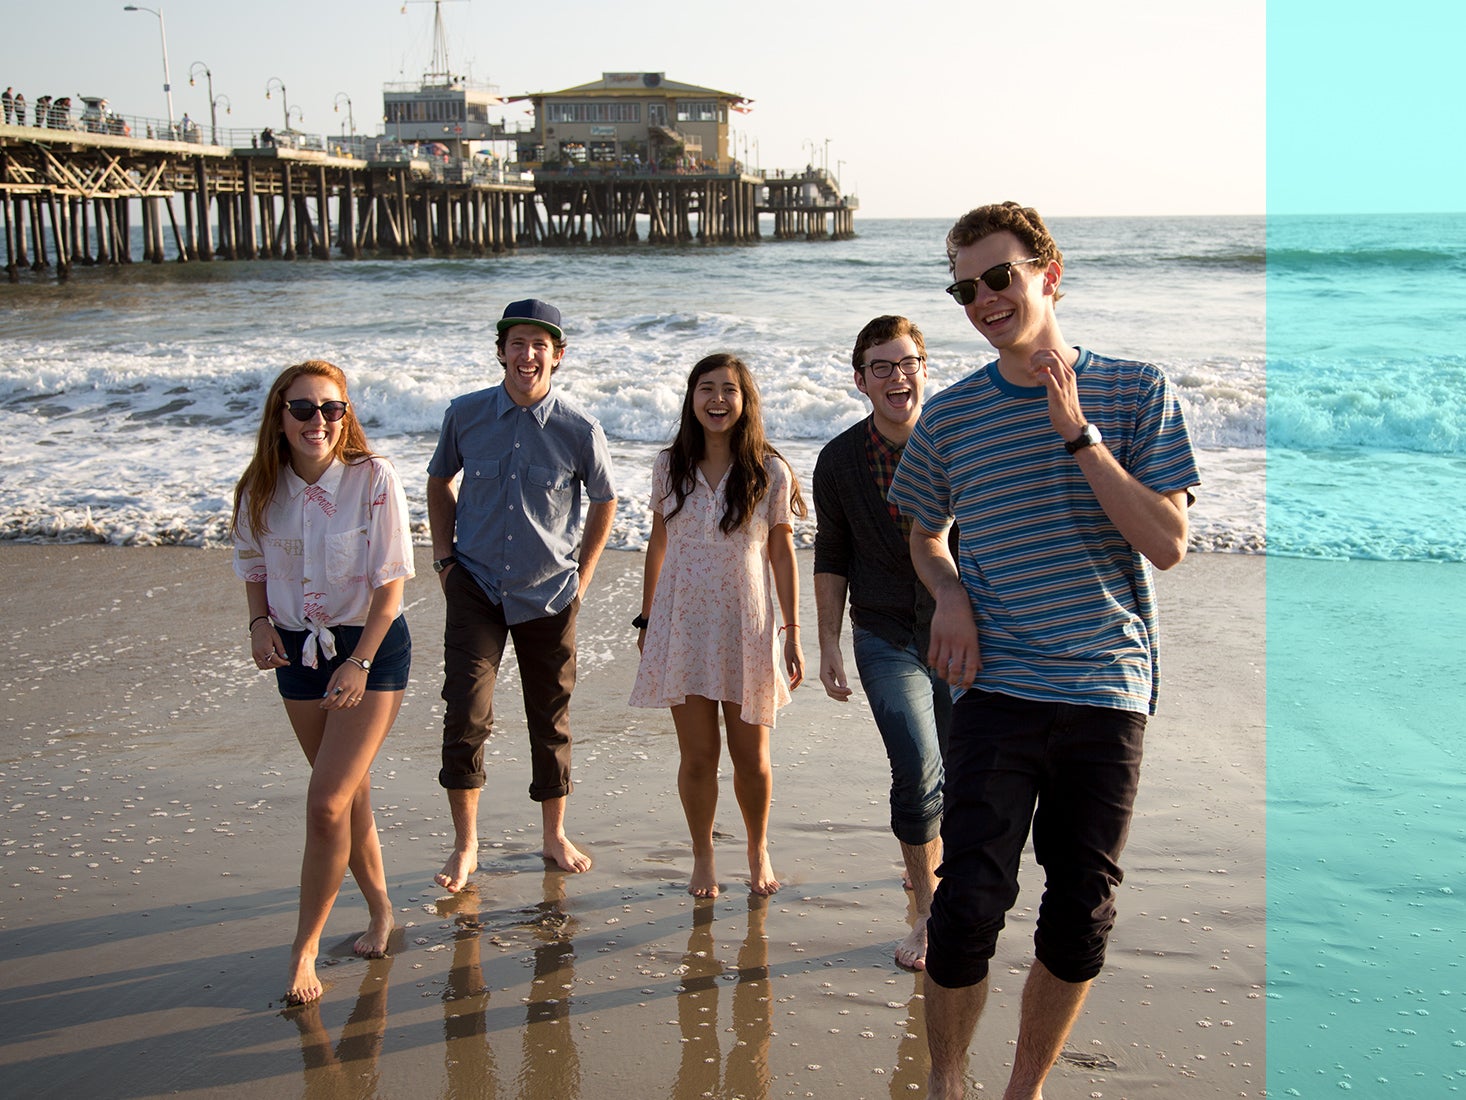 A group of students goof around on the beach near the pier.